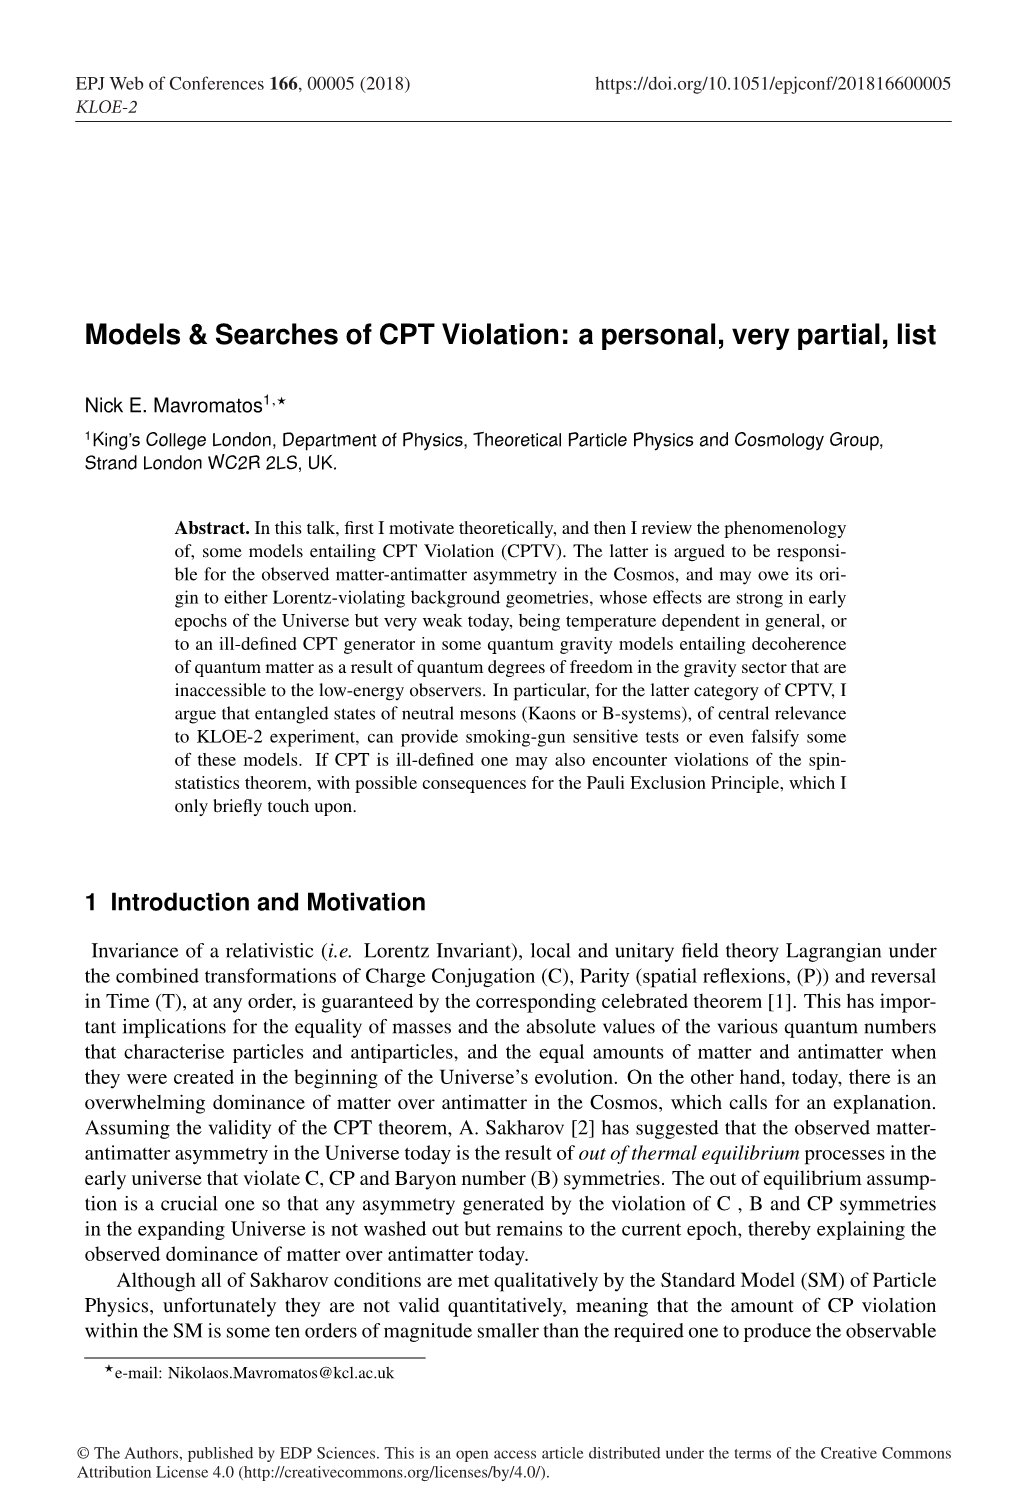 Searches of CPT Violation: a Personal, Very Partial, List